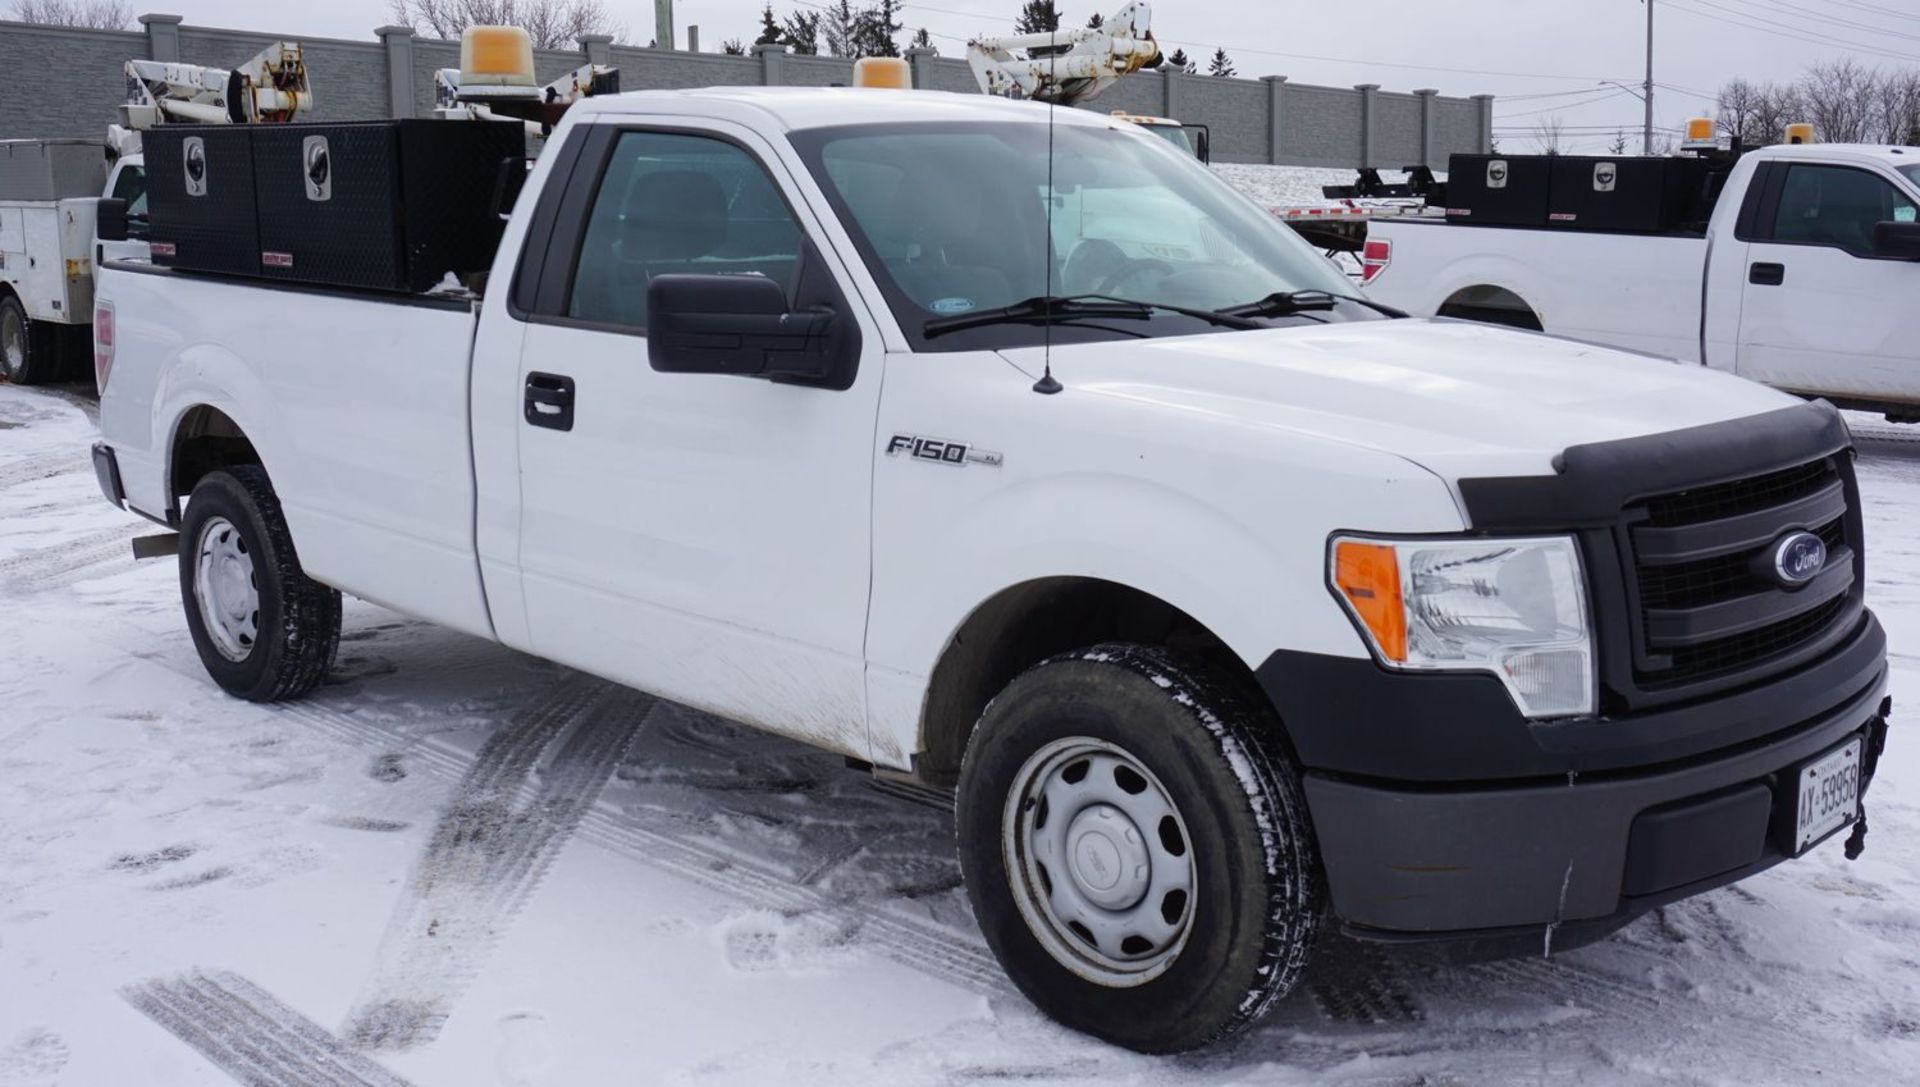 2014 FORD F150XL REG CAB 4X2 PICKUP W/ 5.0L V8 GAS ENGINE C/W (2) WEATHER GUARD HI-SIDE TOOL BOXES, - Image 4 of 10